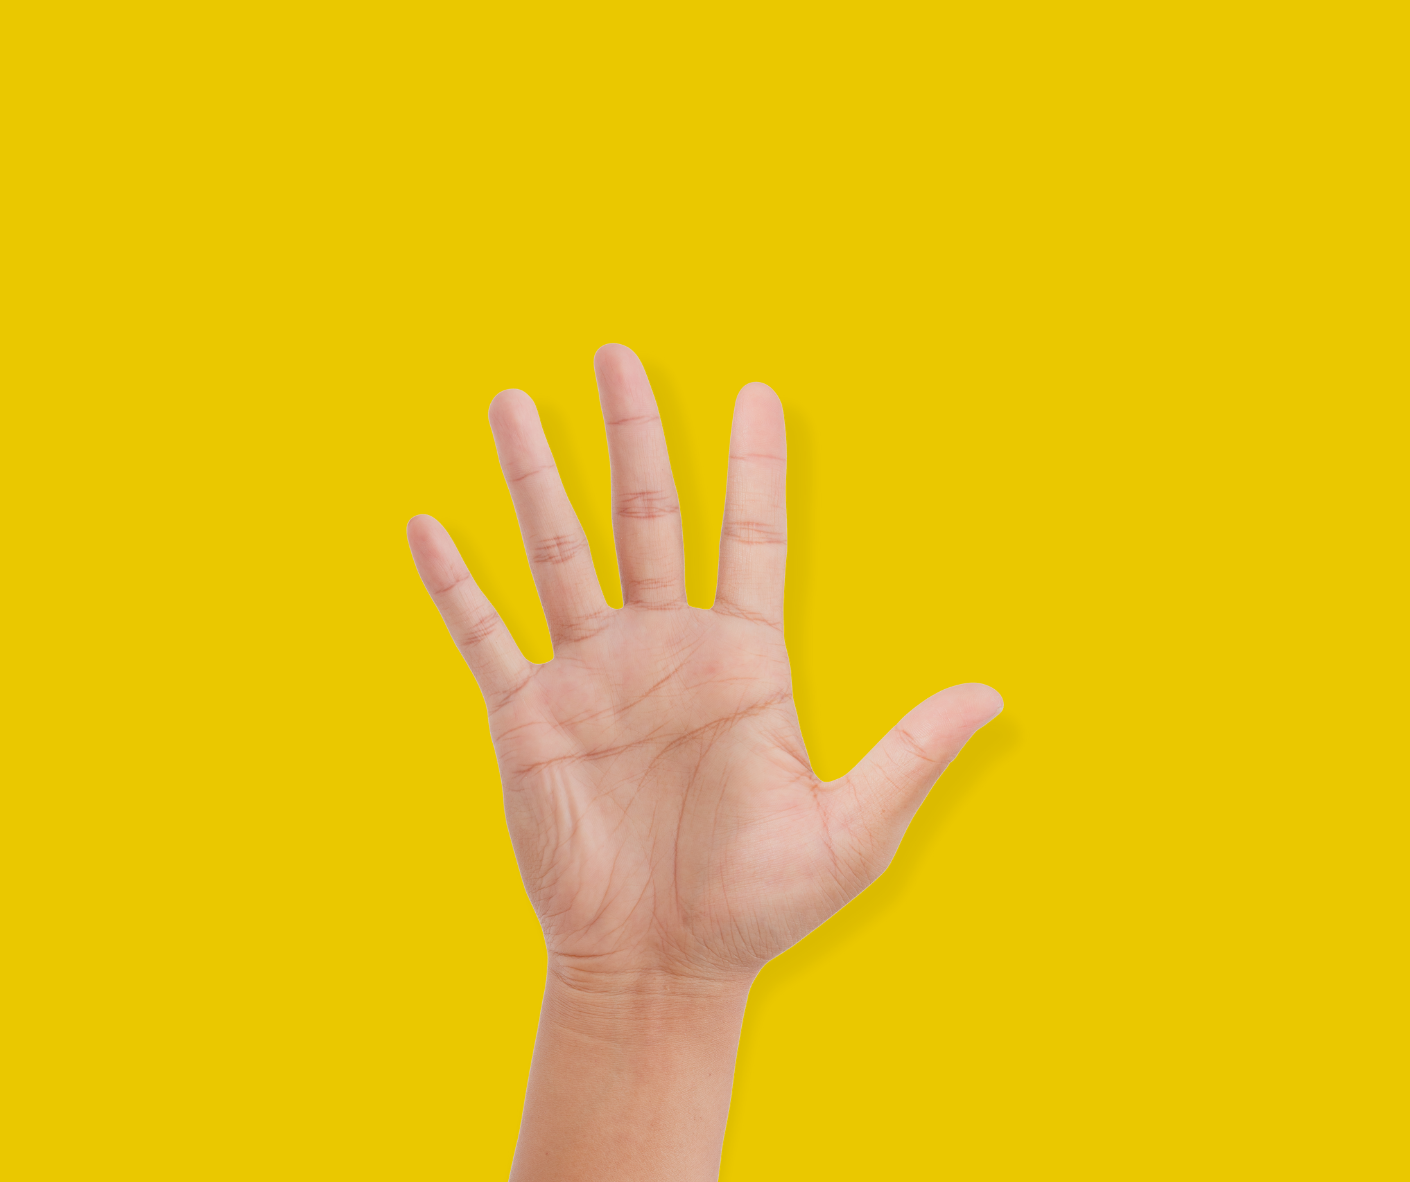 hand-palm-out-5-fingers-on-yellow-background